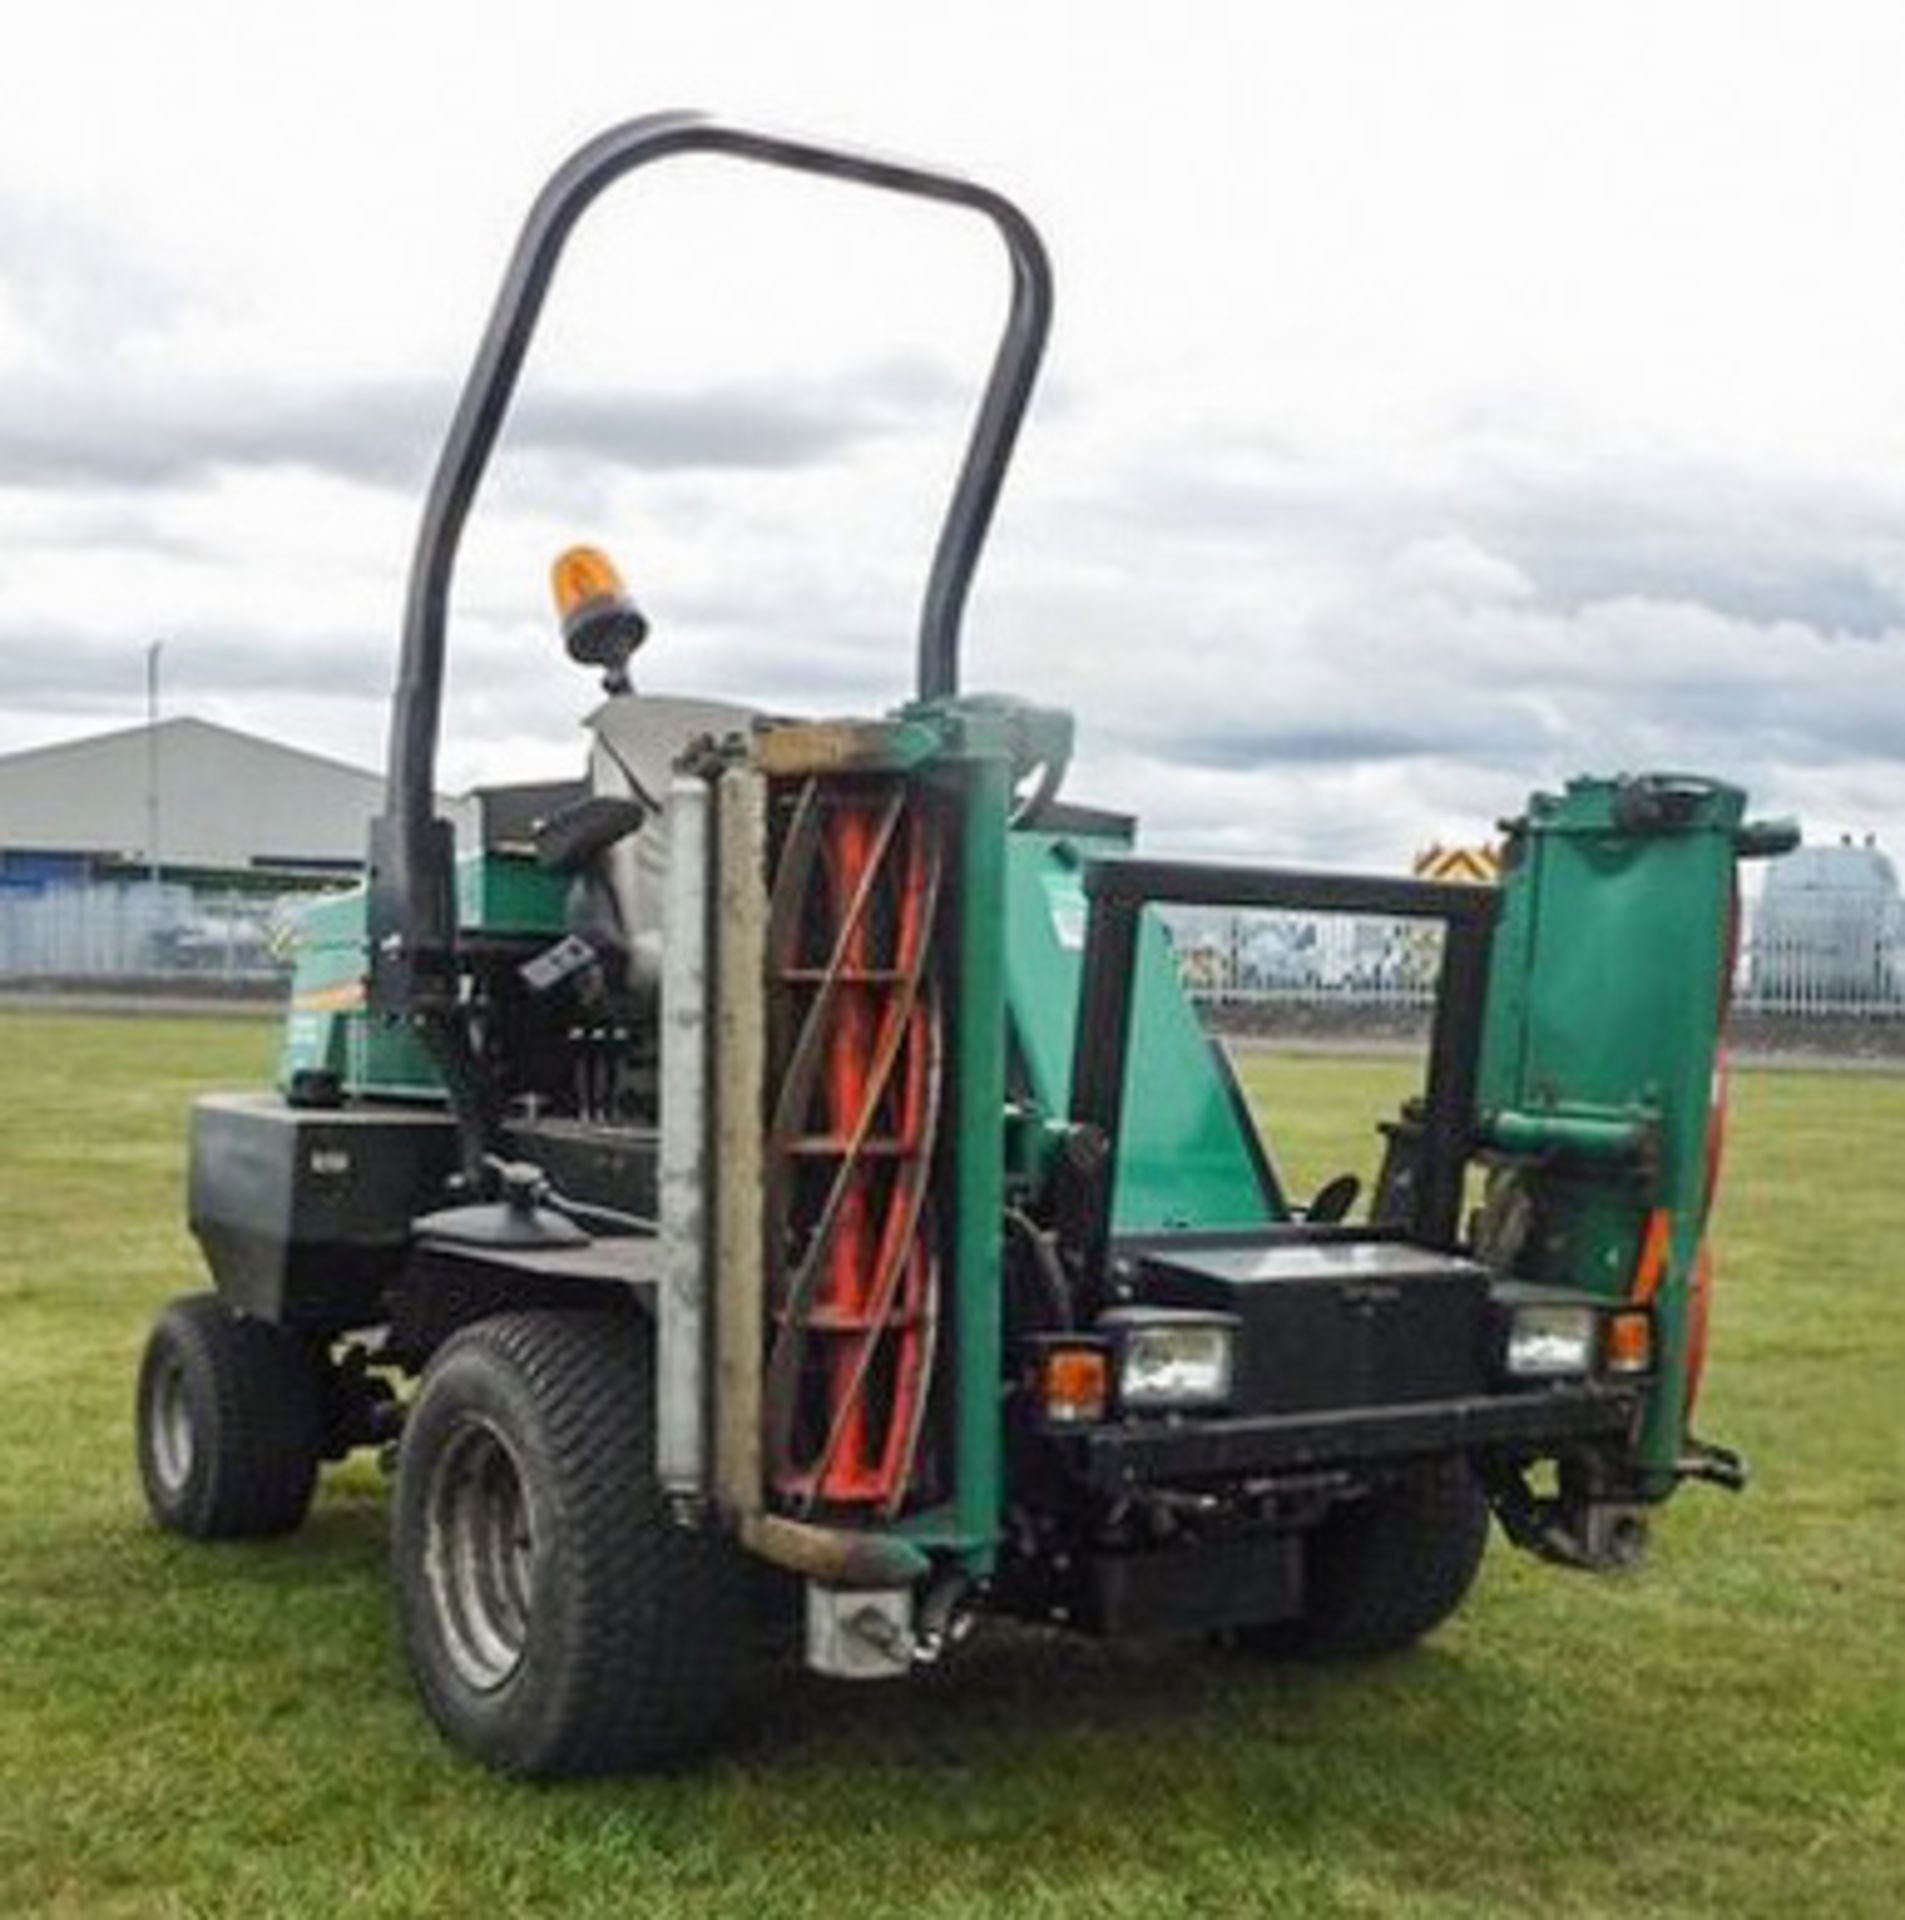 2009 RAMSOMES HIGHWAY 2130 4WD TRIPLE MOWER, REG - SF09LSV, CHASSIS - CU0000948, 2639HRS (NOT VERIFI - Image 2 of 21